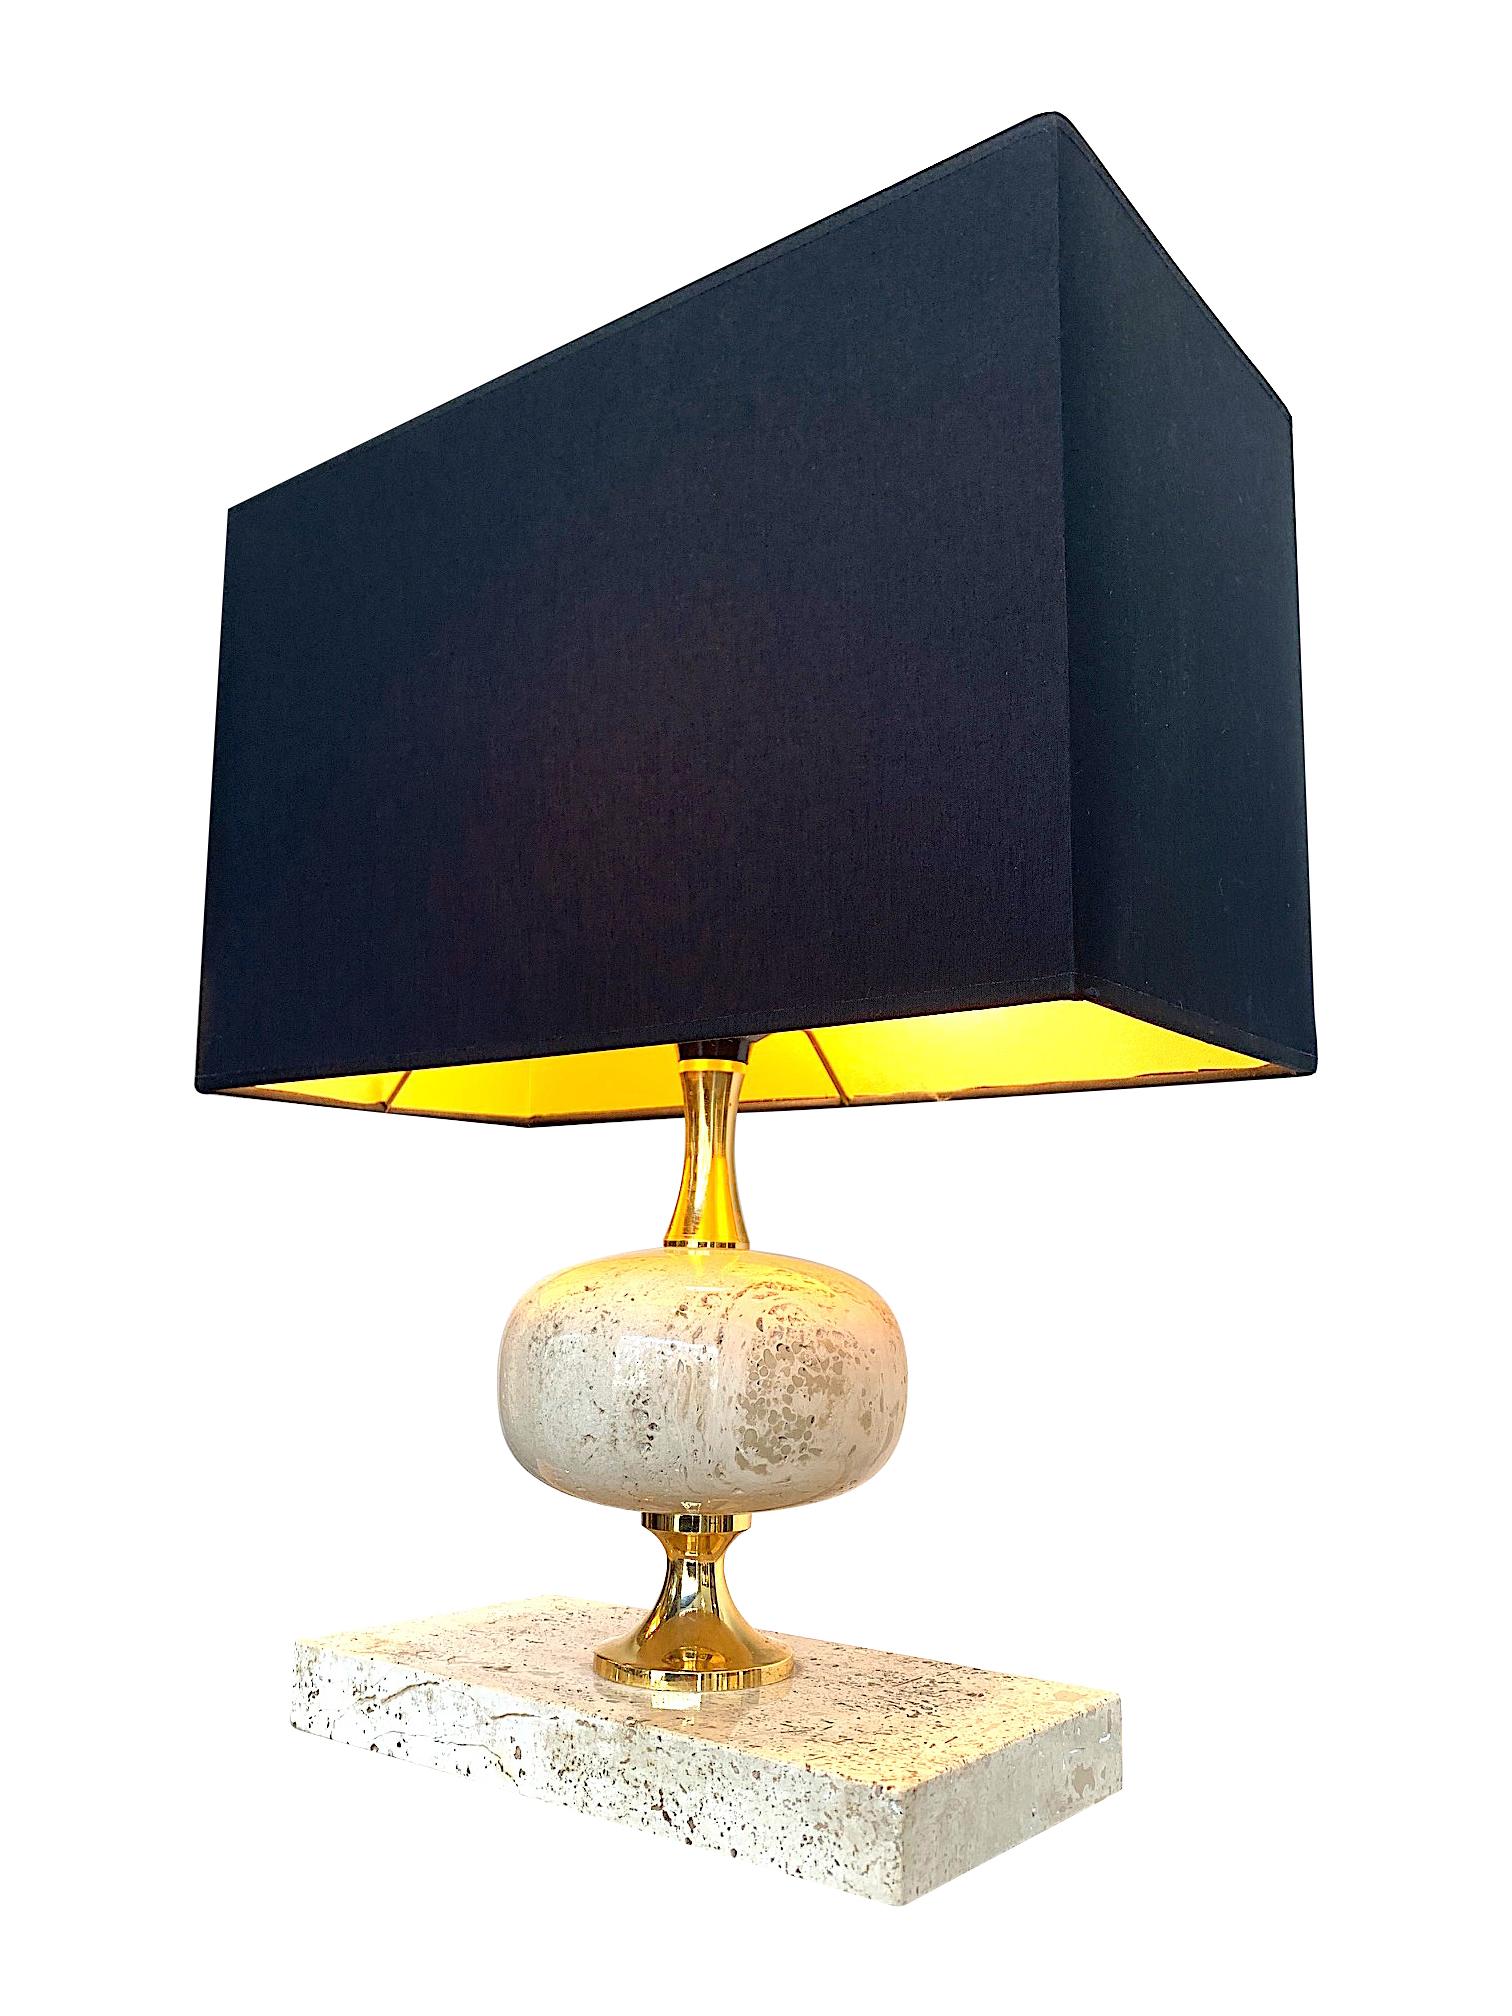 Late 20th Century 1970s Maison Barbier Travertine and Brass Lamps with New Bespoke Shade